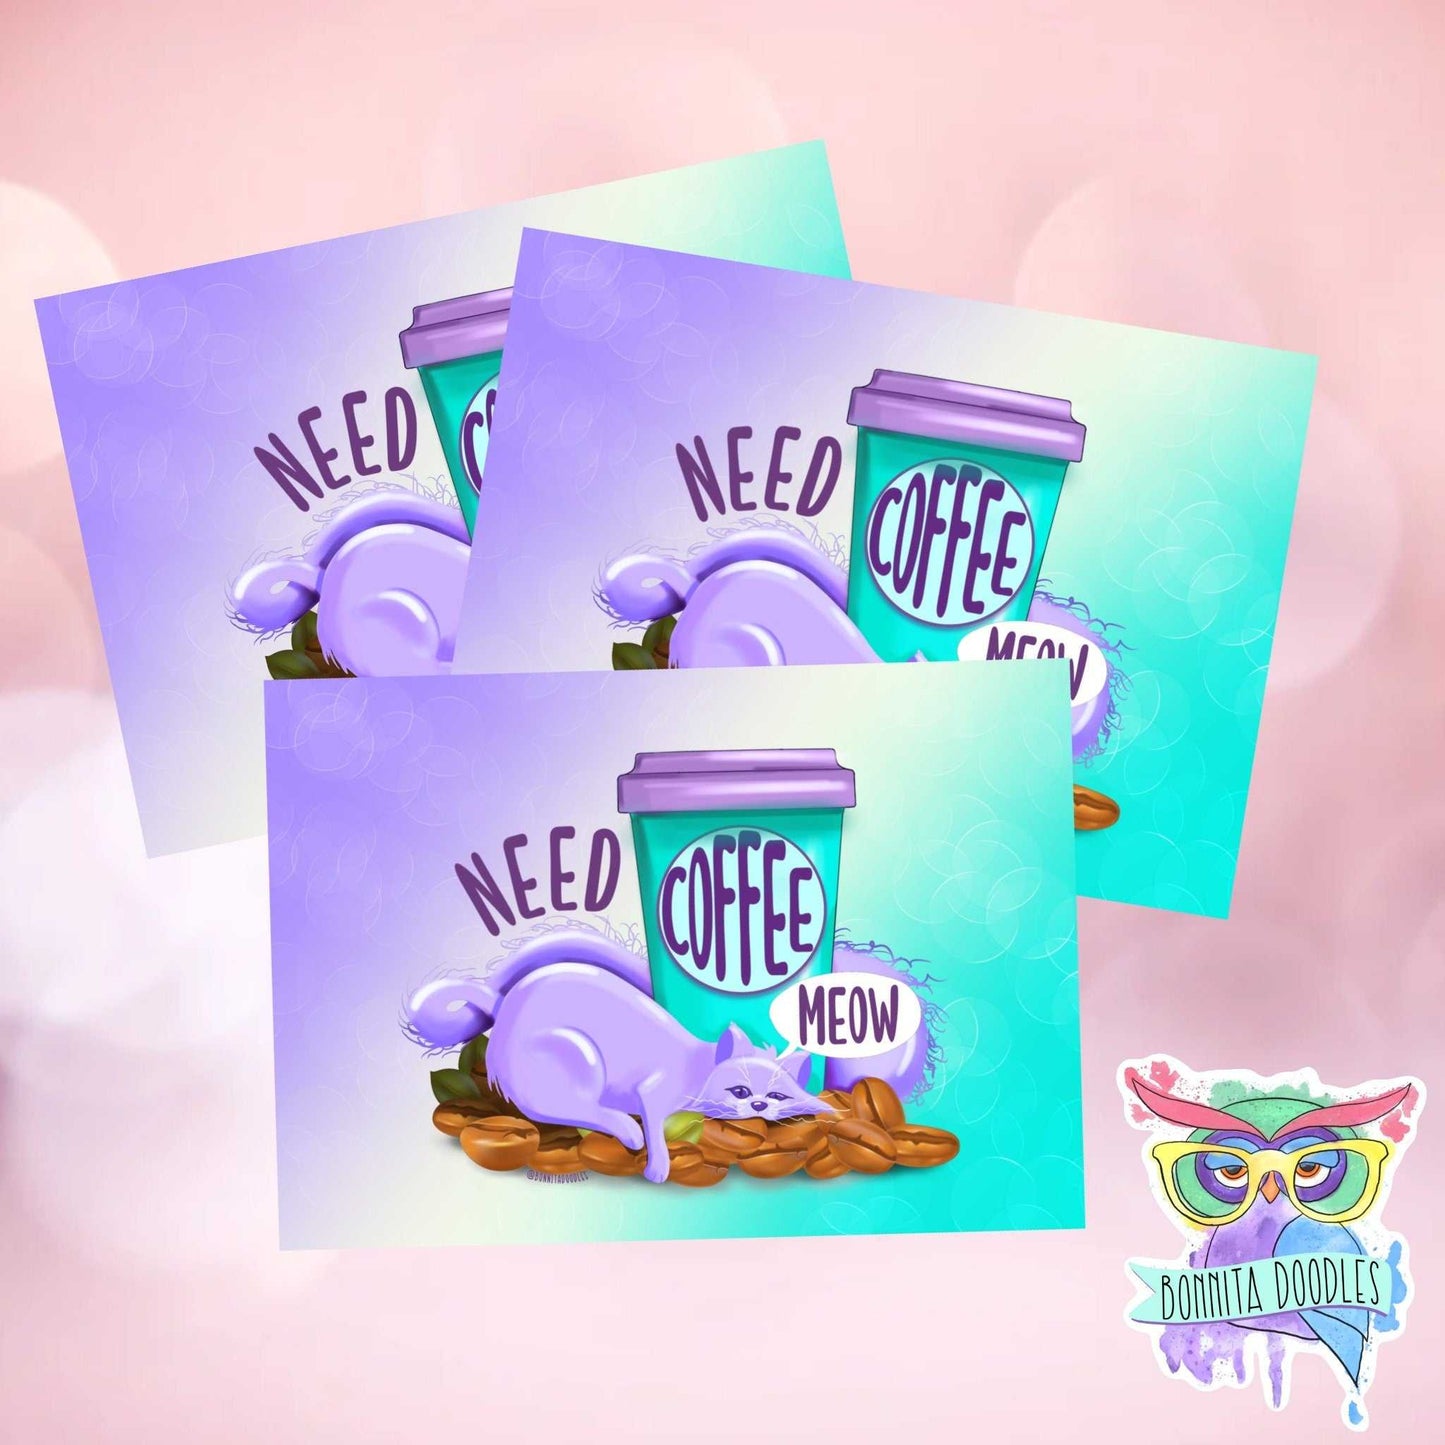 Need coffee meow - cat quote sticker or print